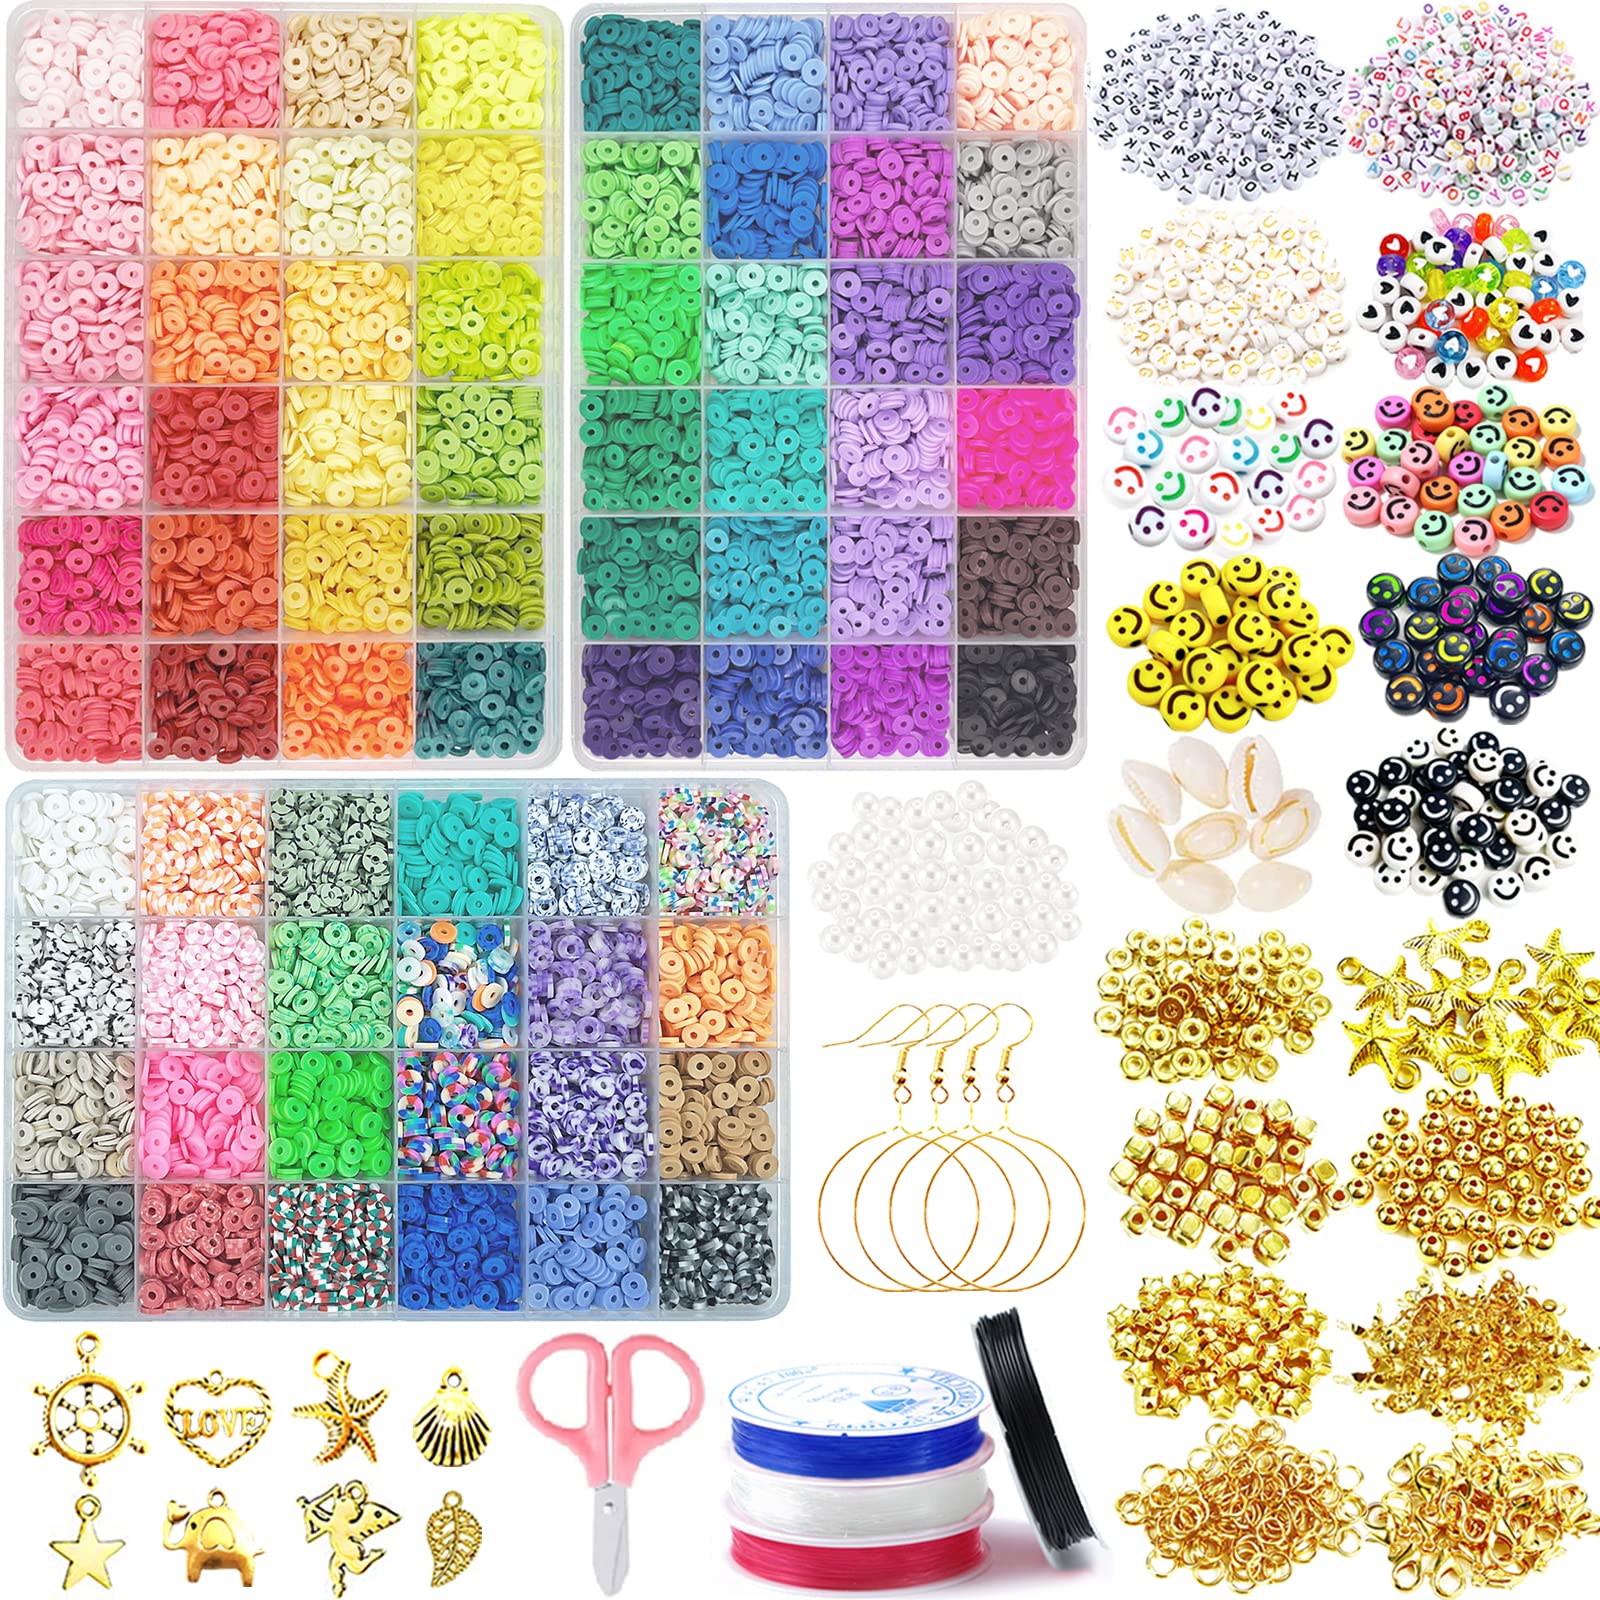 pmbqifay 72 colors clay Beads for Bracelets Making, 12460pcs clay